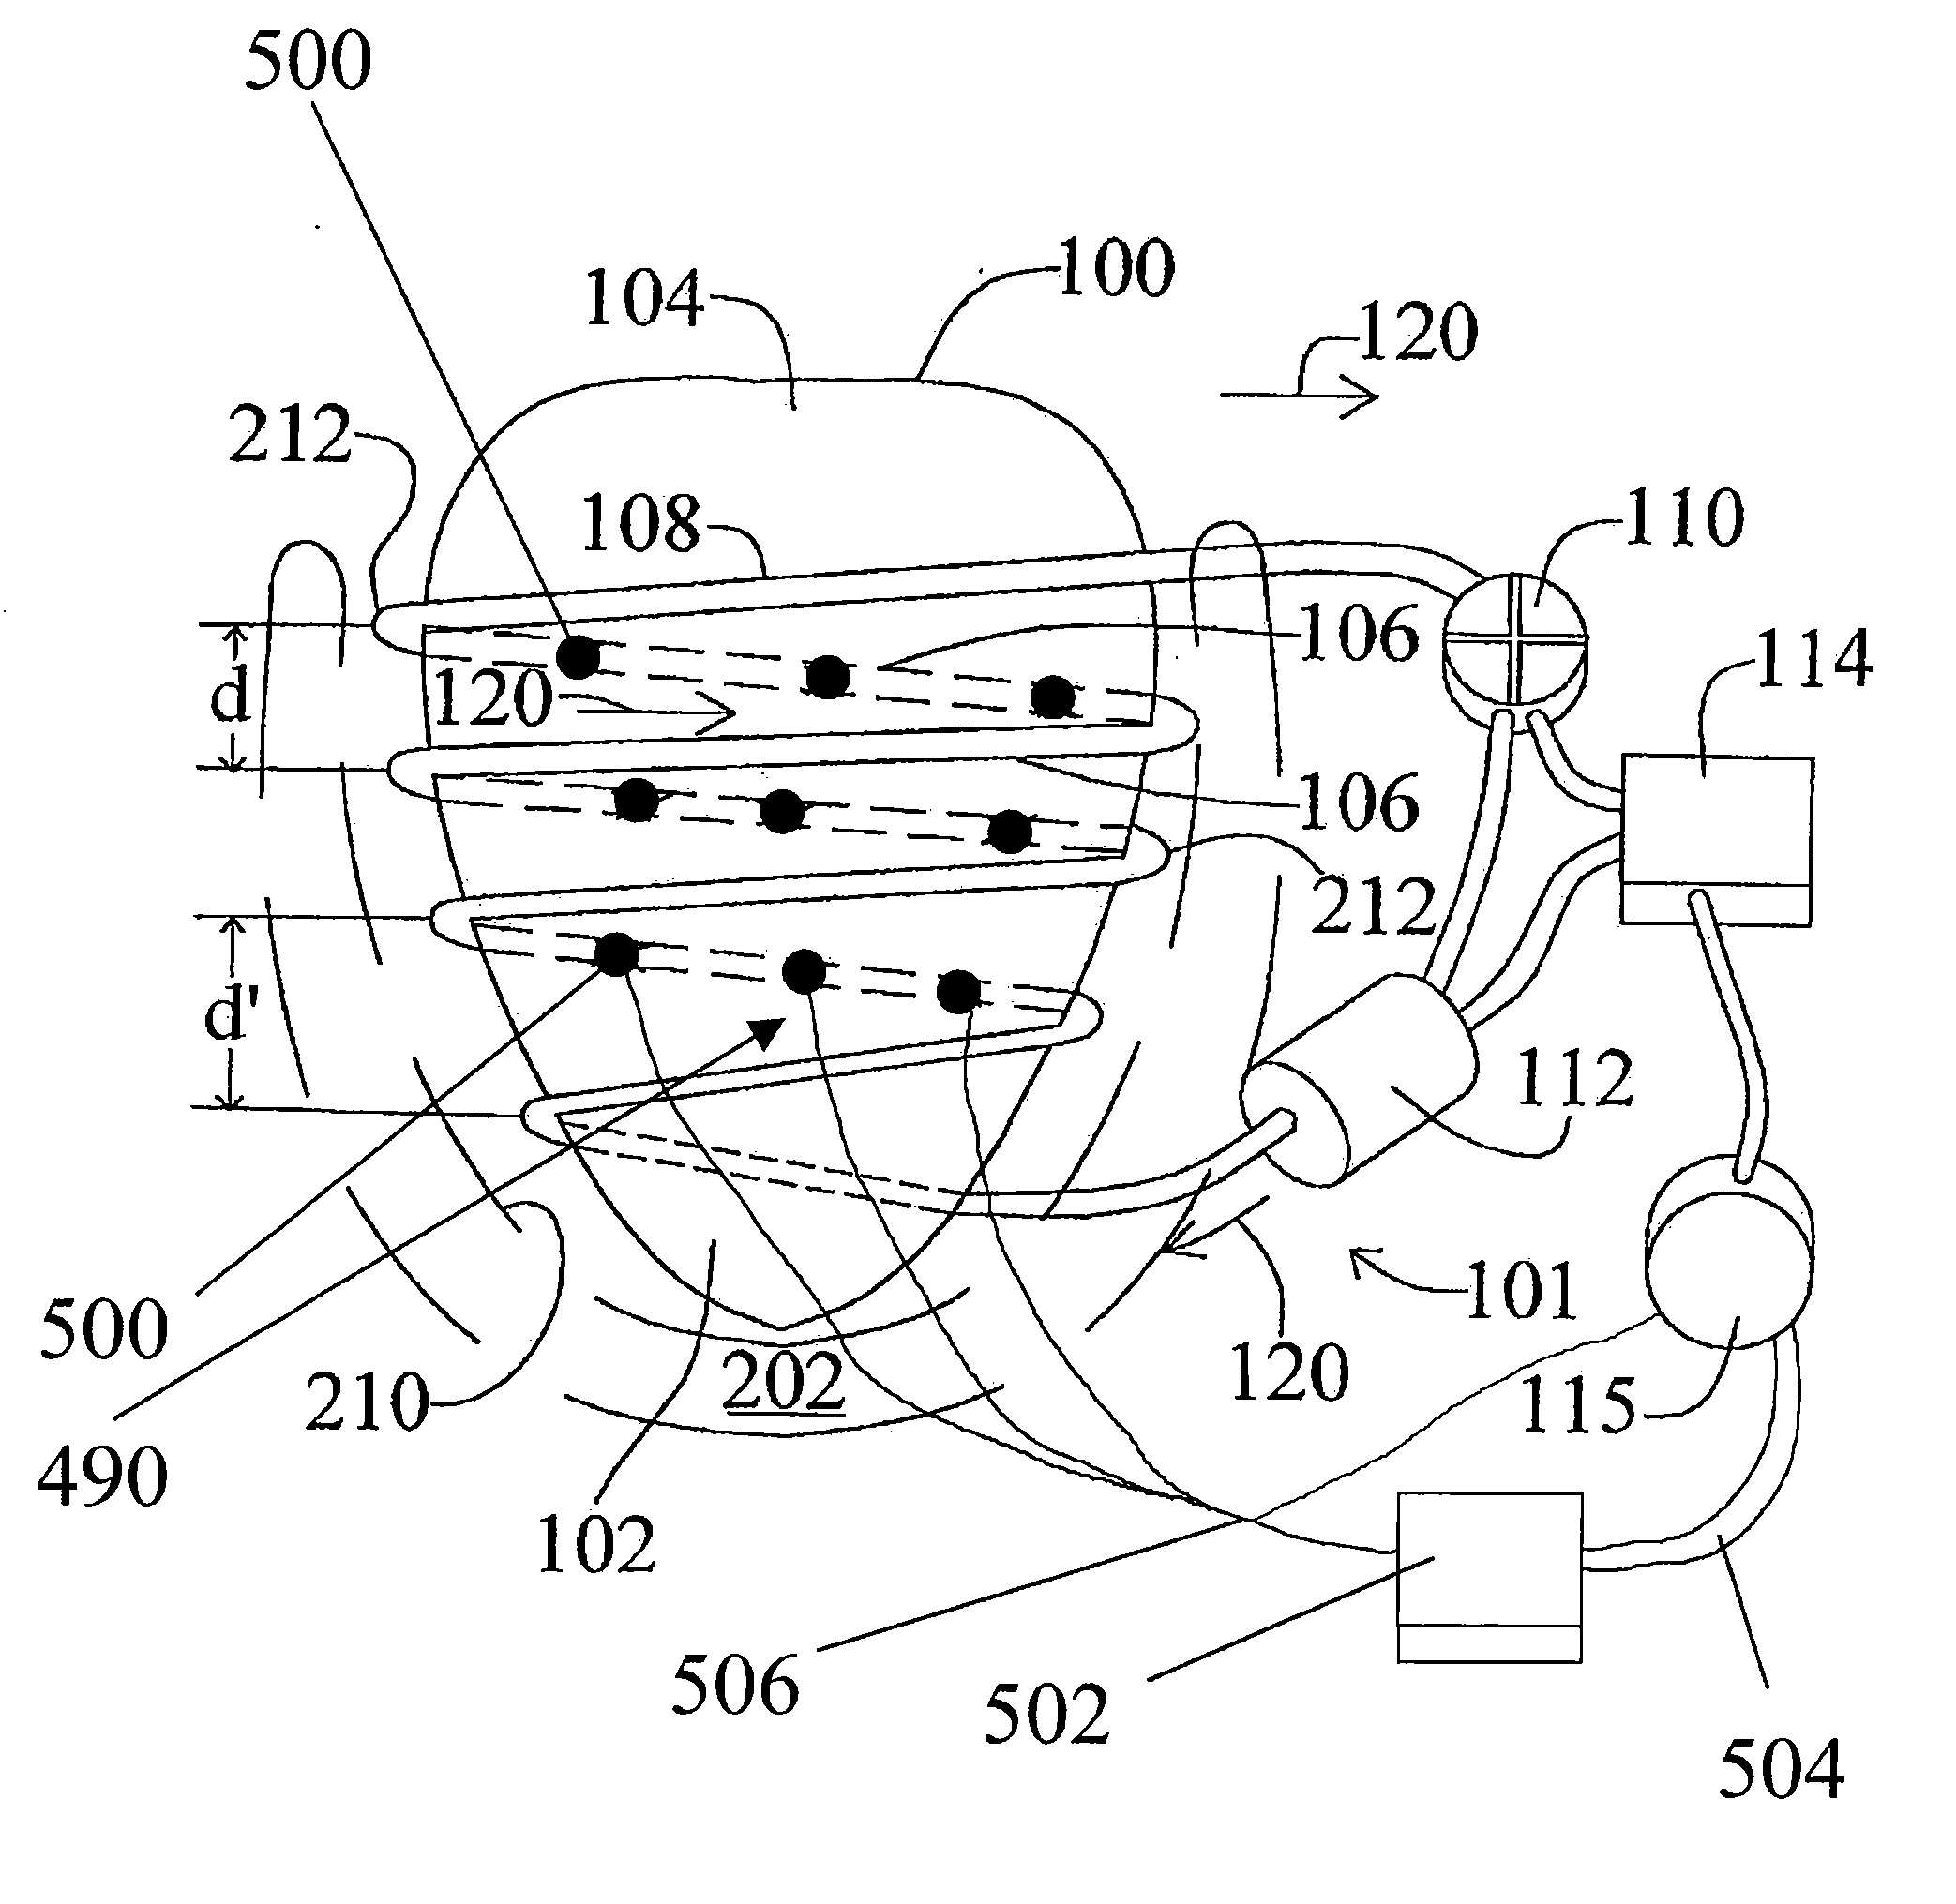 Implantable cardiac assist device with a phased electrode array